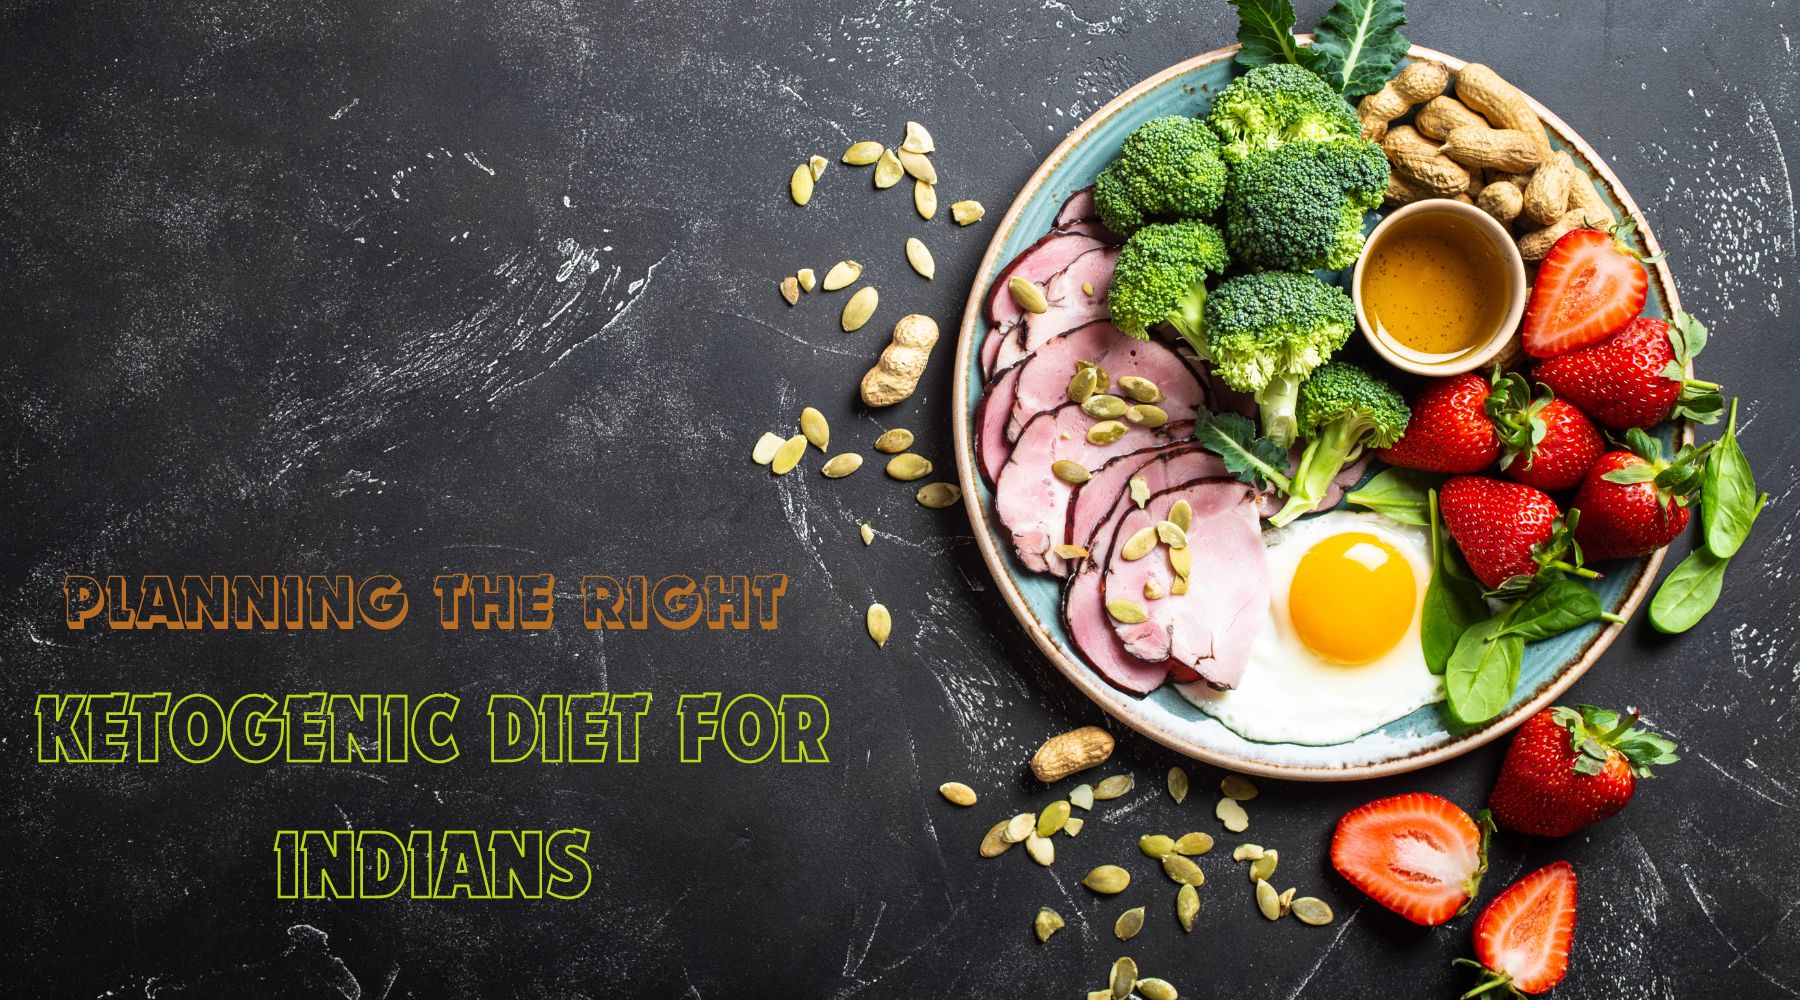 Planning the Right Ketogenic Diet for Indians